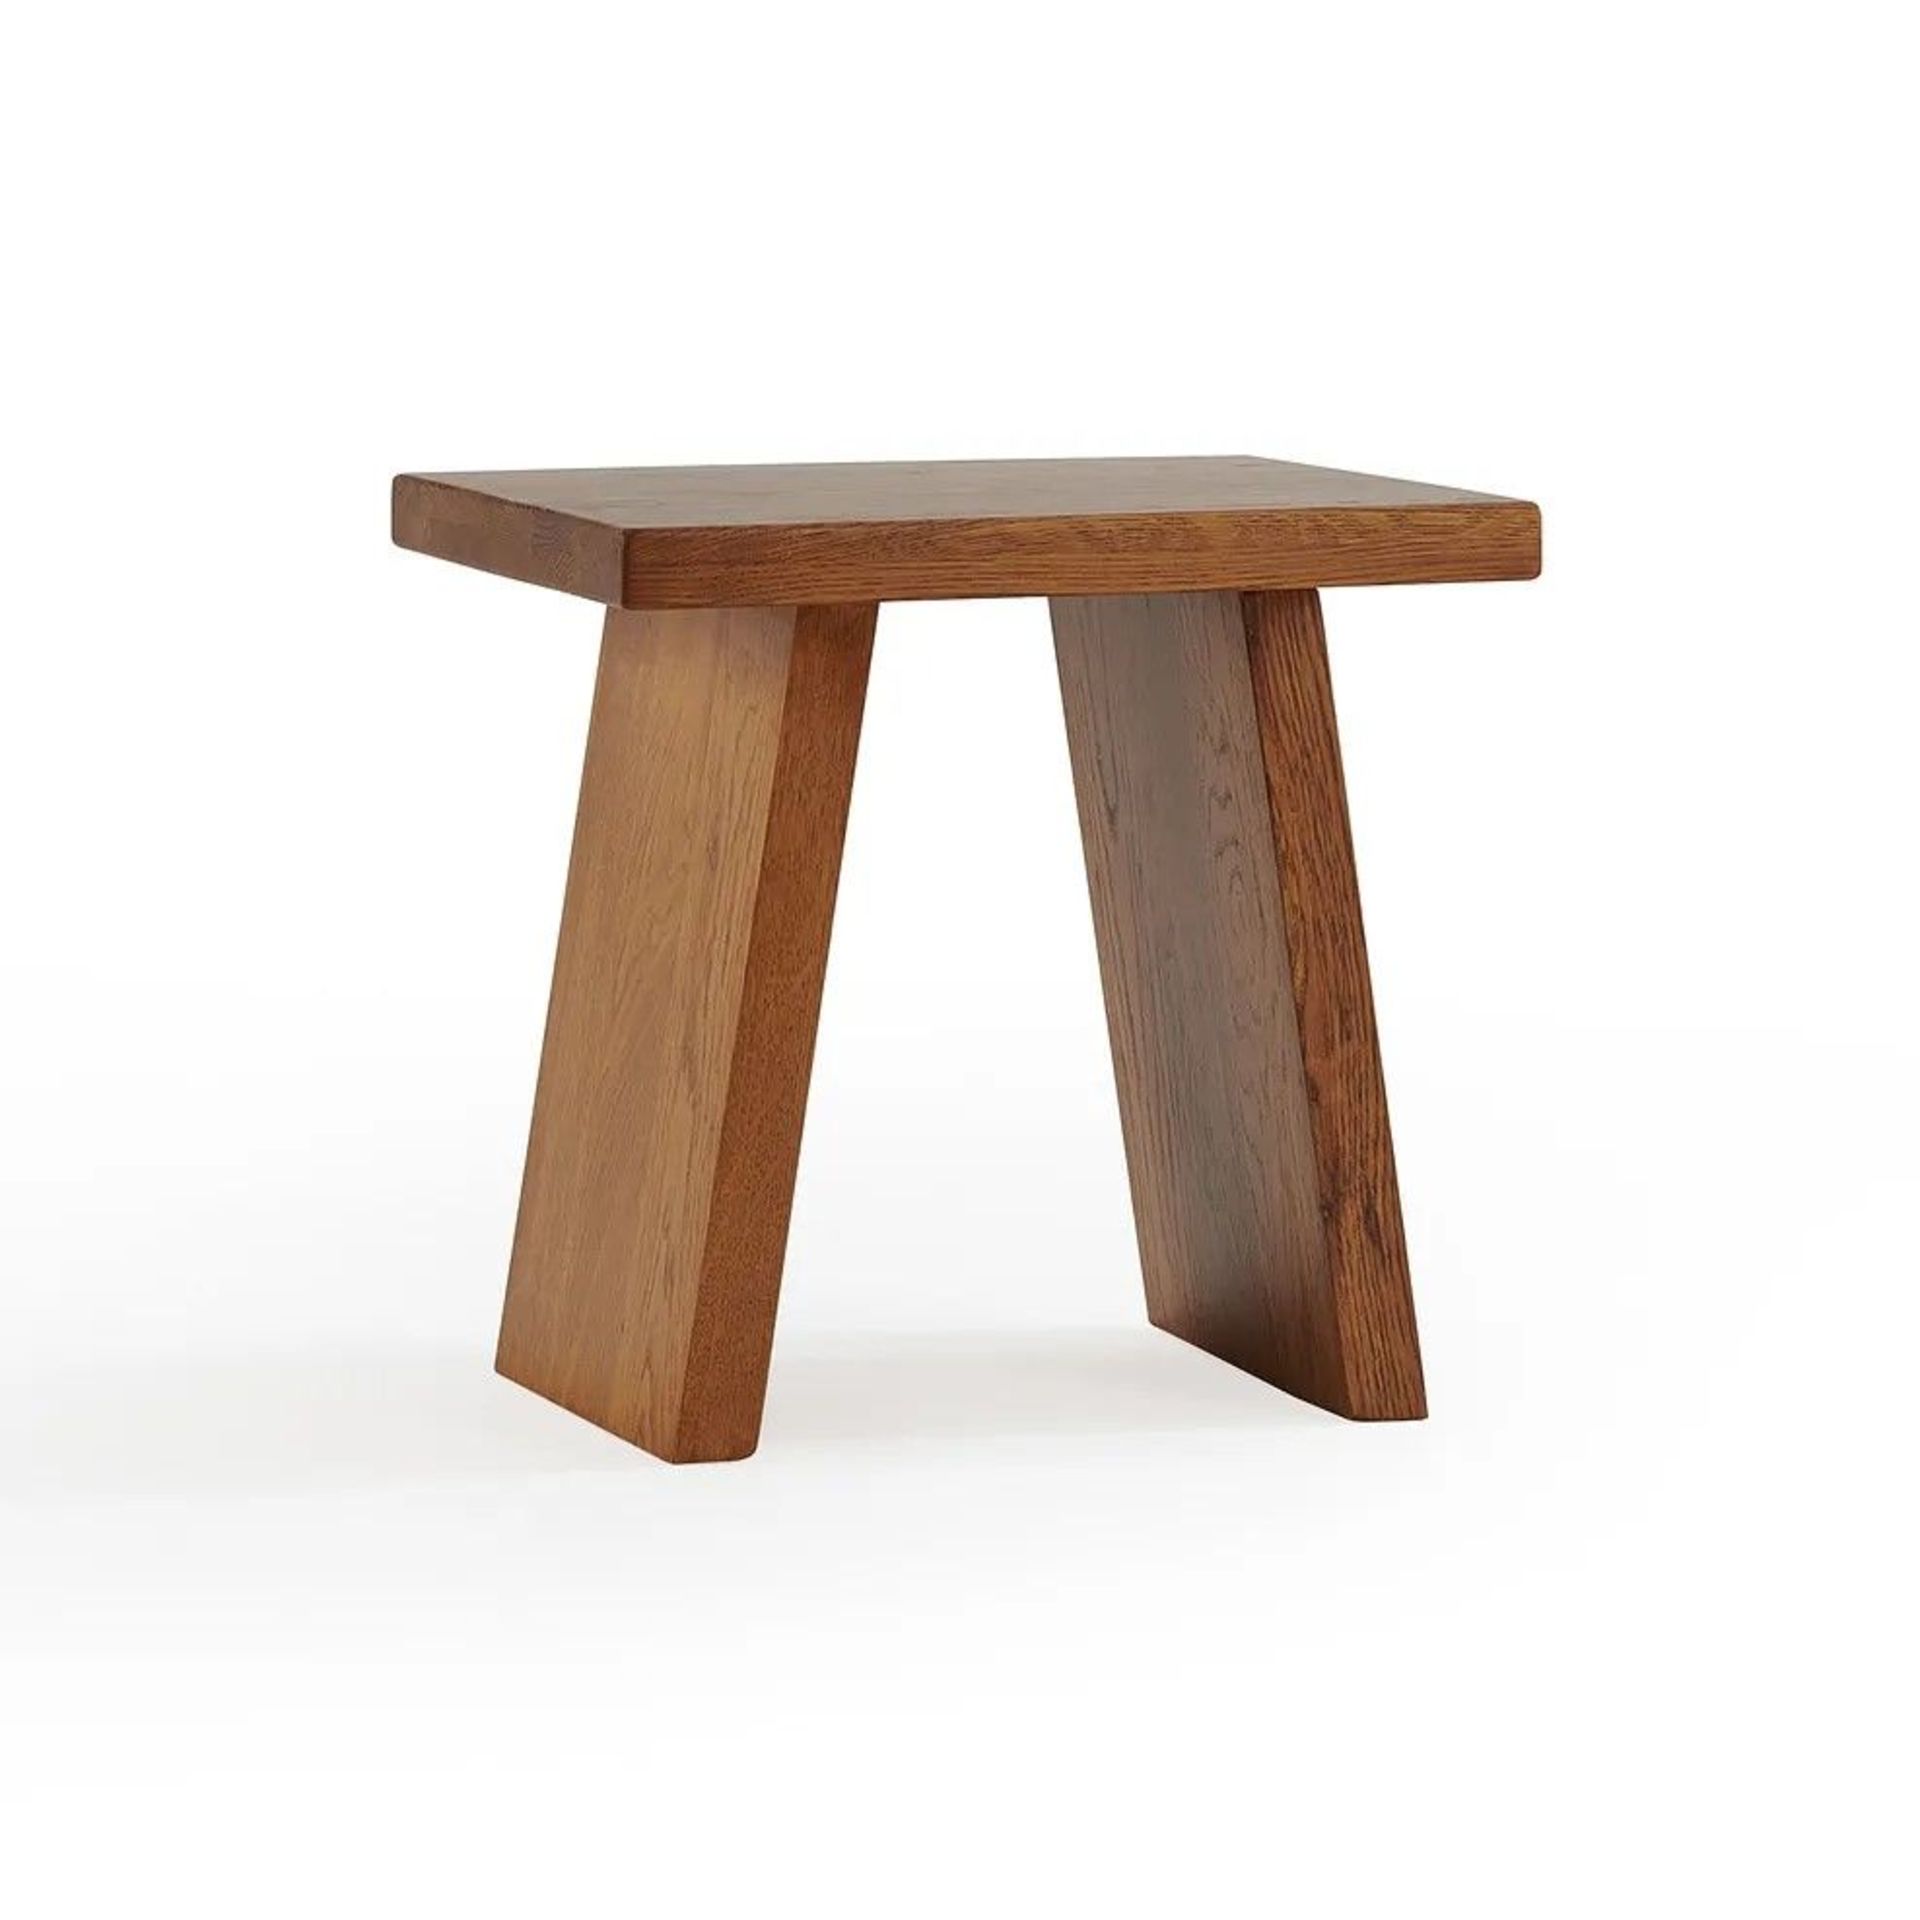 4 X NEW BOXED Rustic Solid Oak Stool. RRP £130 EACH, TOTAL RRP £520.(BEN001STR) For a more open